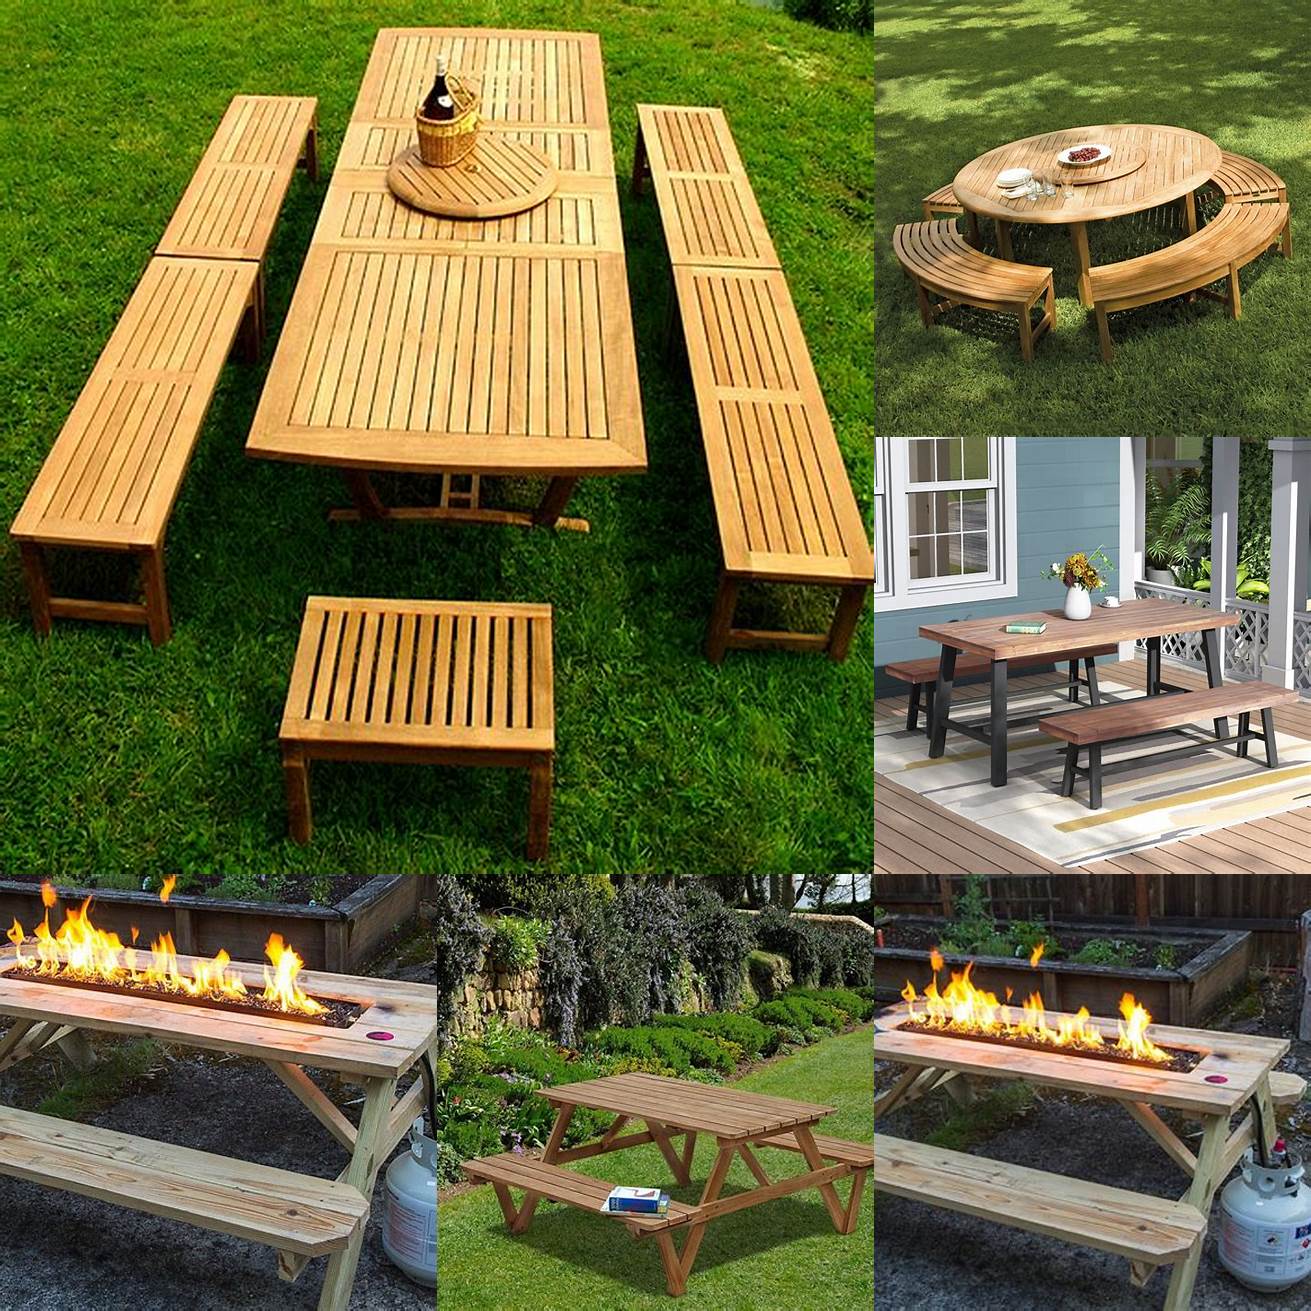 Teak Picnic Table and Benches With Fire Pit